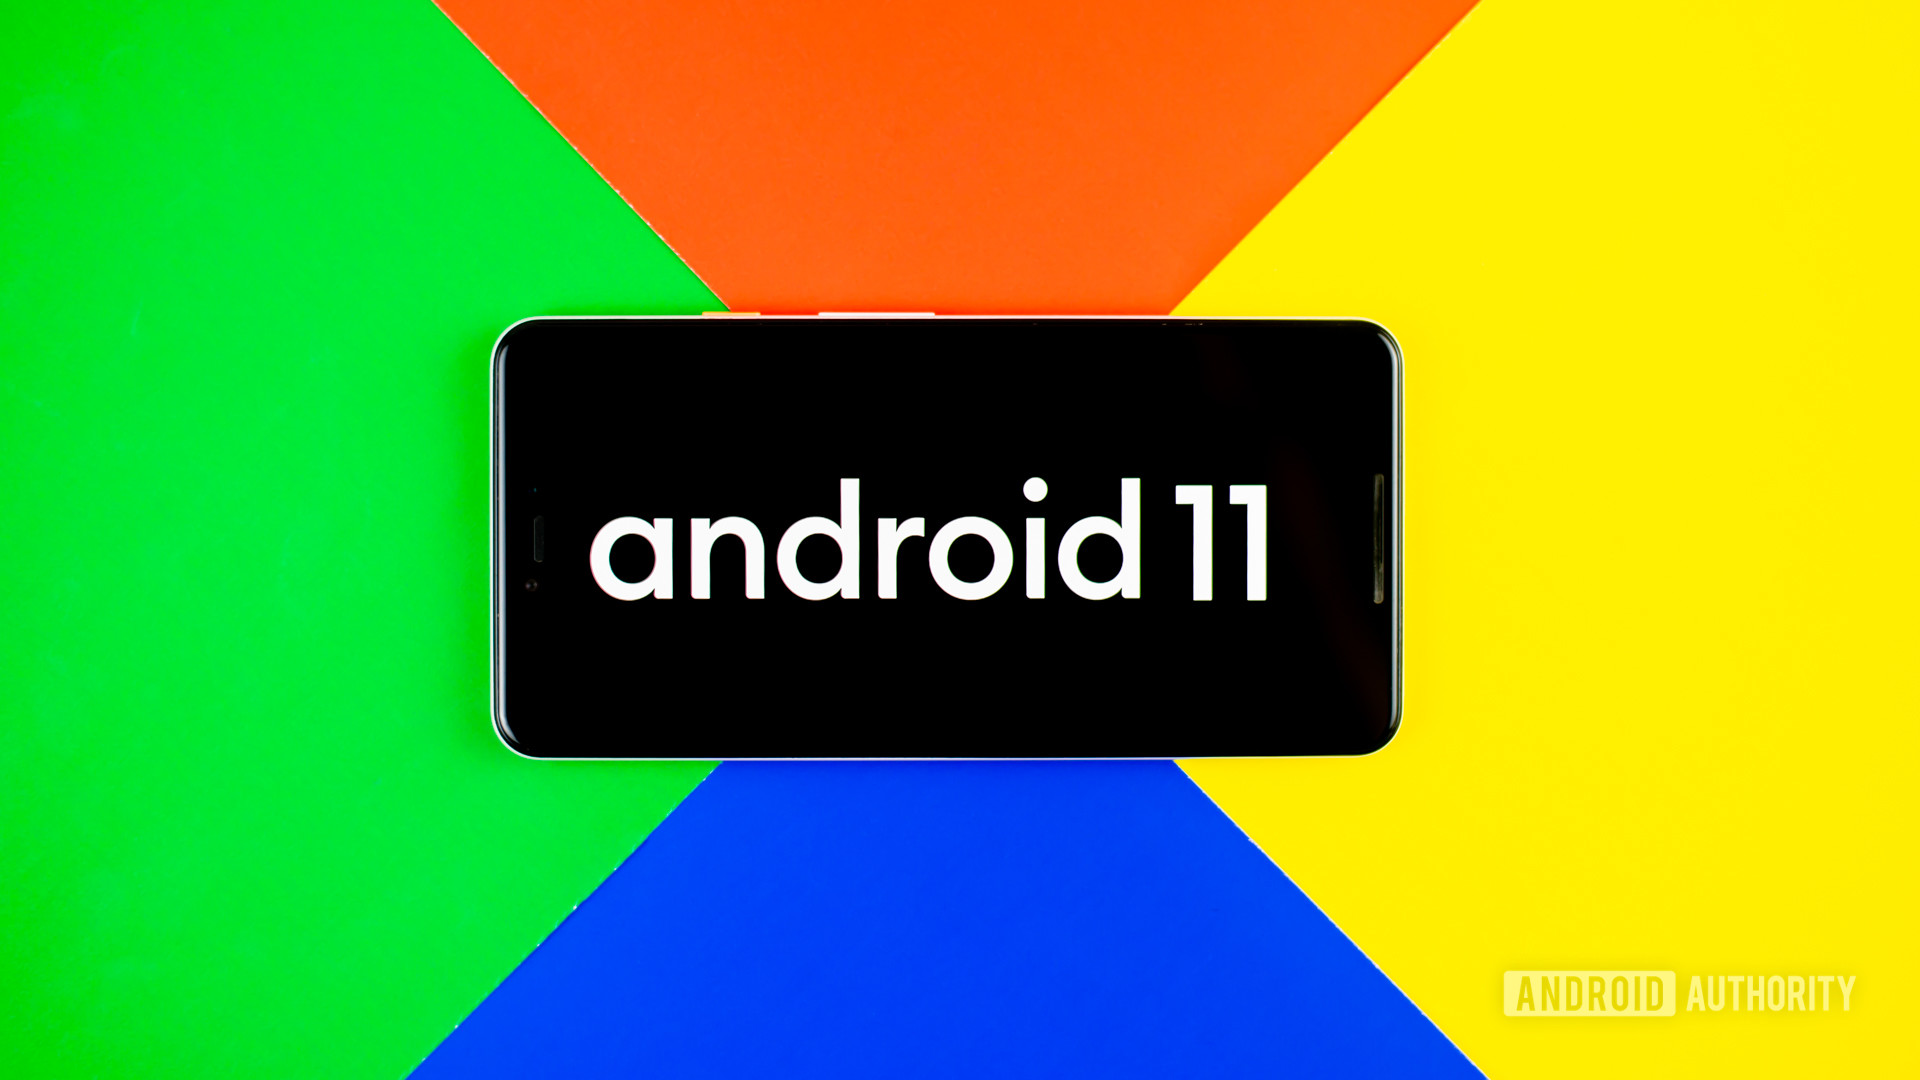 Android 11 apparently boasts fastest adoption rate compared to older versions